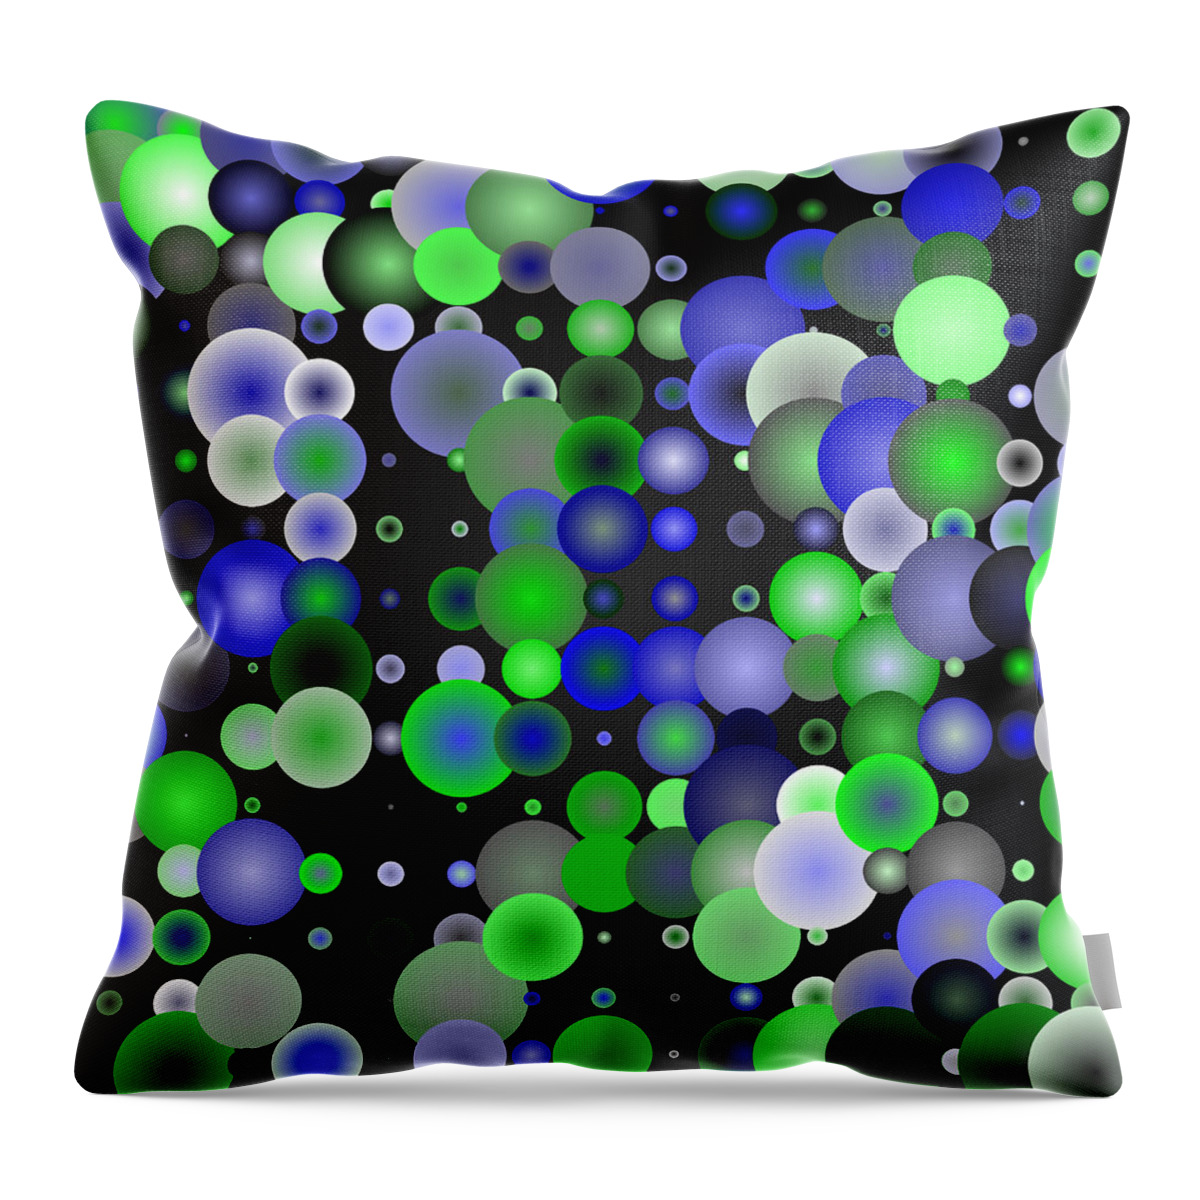 Abstract Digital Algorithm Rithmart Throw Pillow featuring the digital art Tiles.blue-green.2 by Gareth Lewis